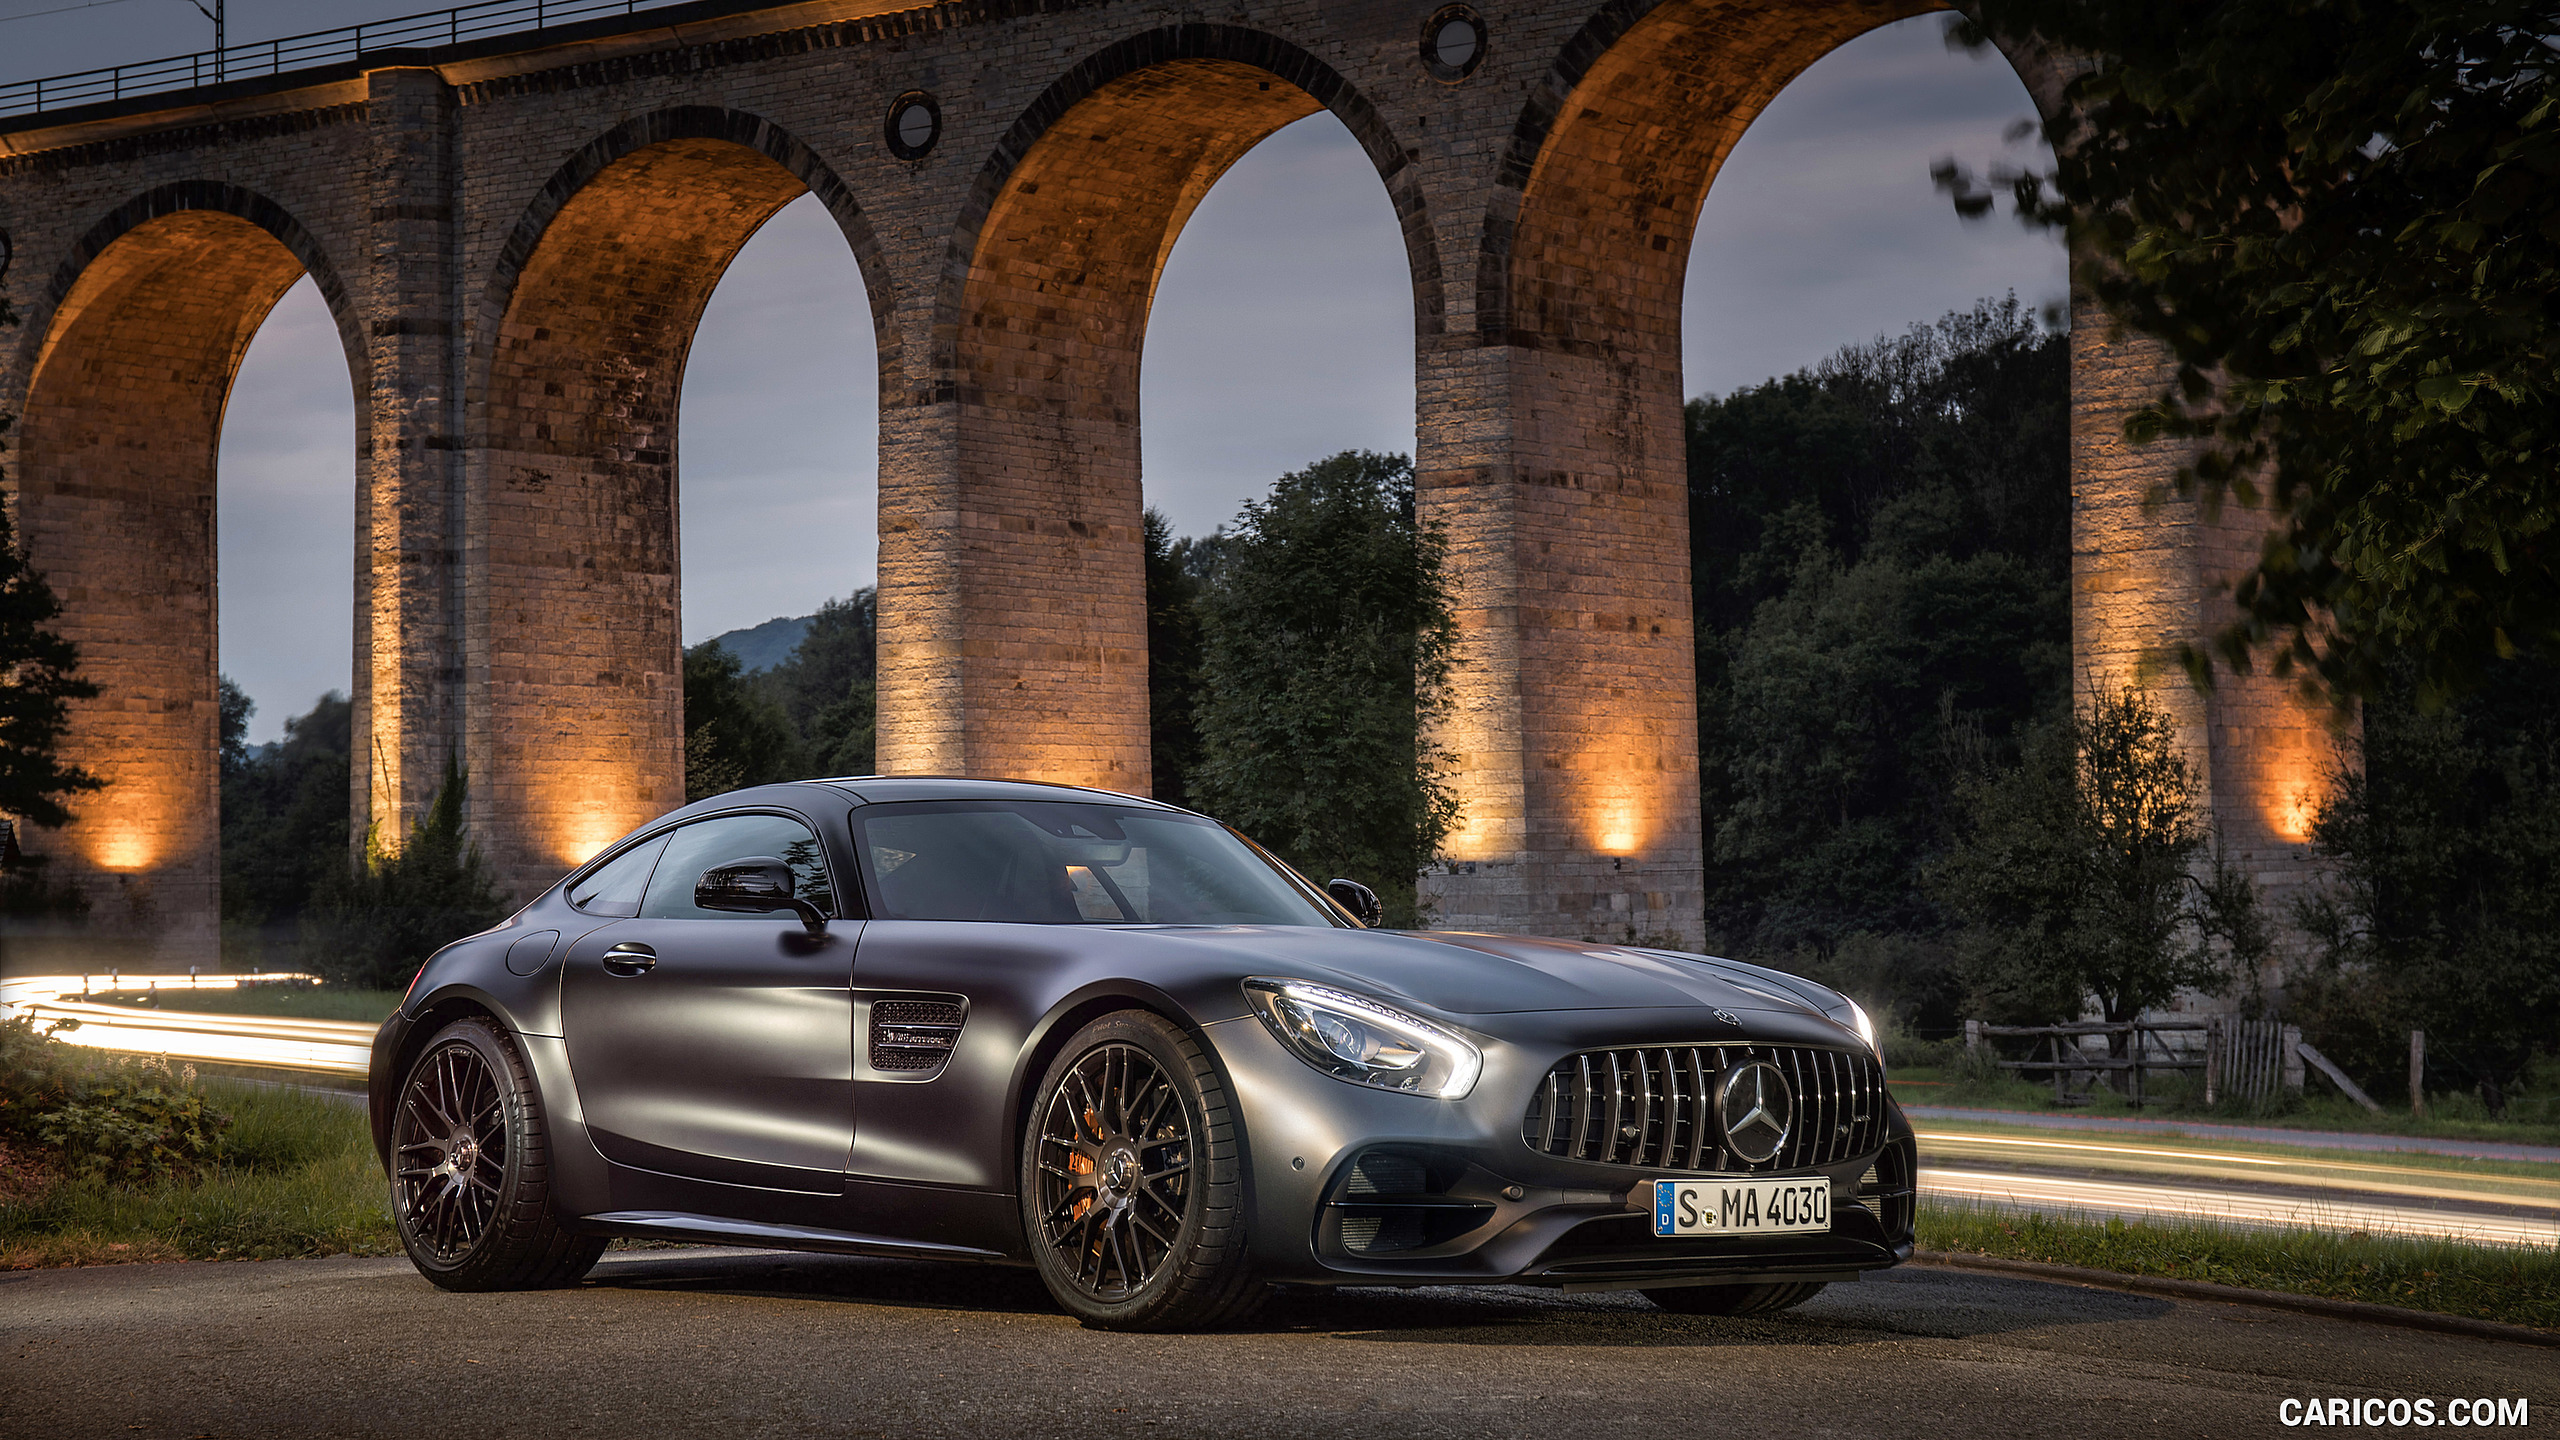 2018 Mercedes-AMG GT C Coupe Edition 50 - Front Three-Quarter, #33 of 70